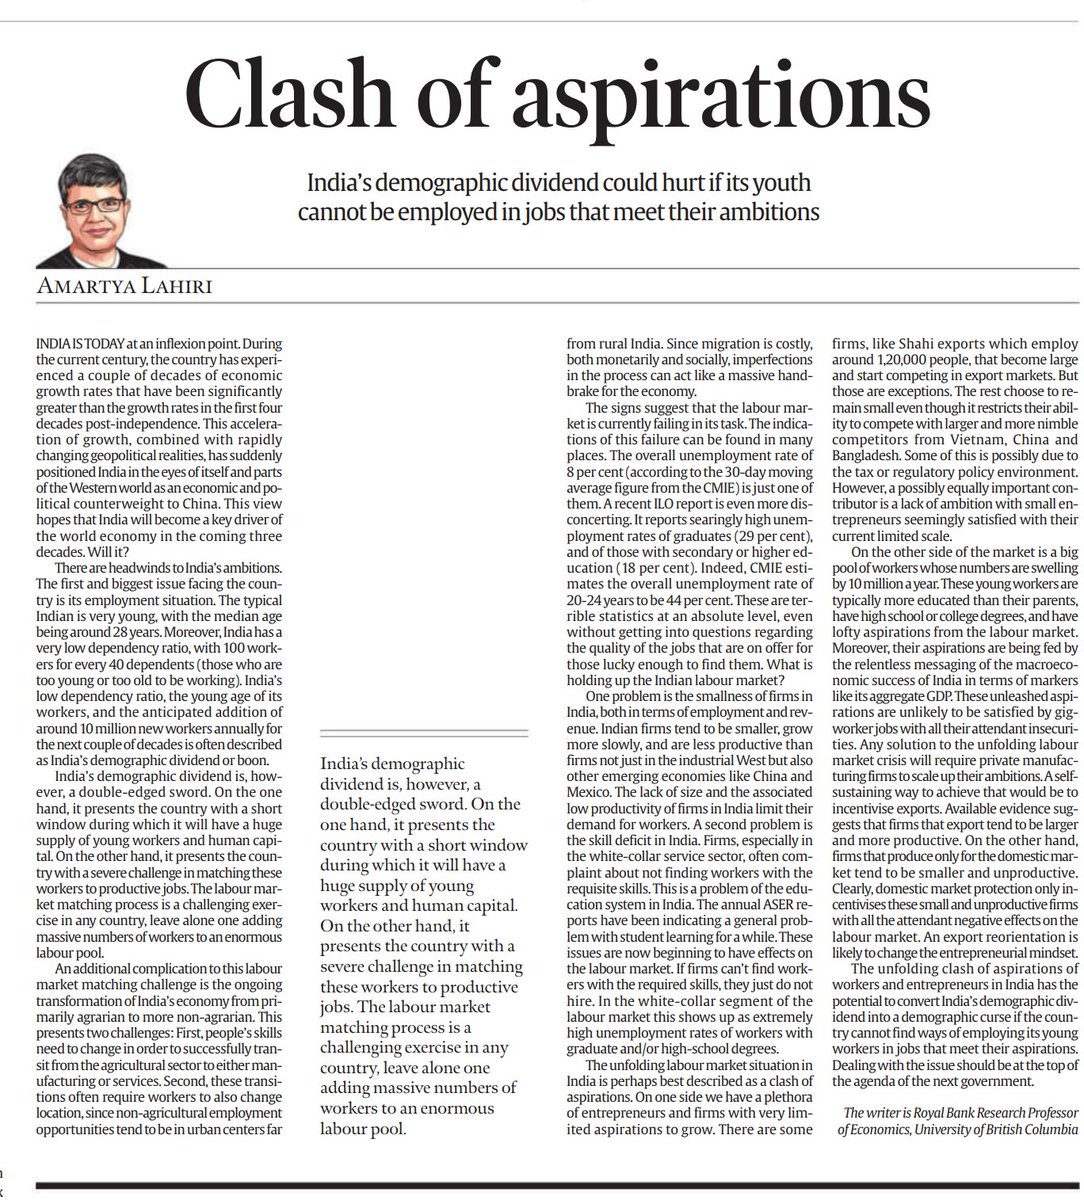 India's labor market is in trouble. In this Indian Express article I discuss some of the issues including the role of aspirations.